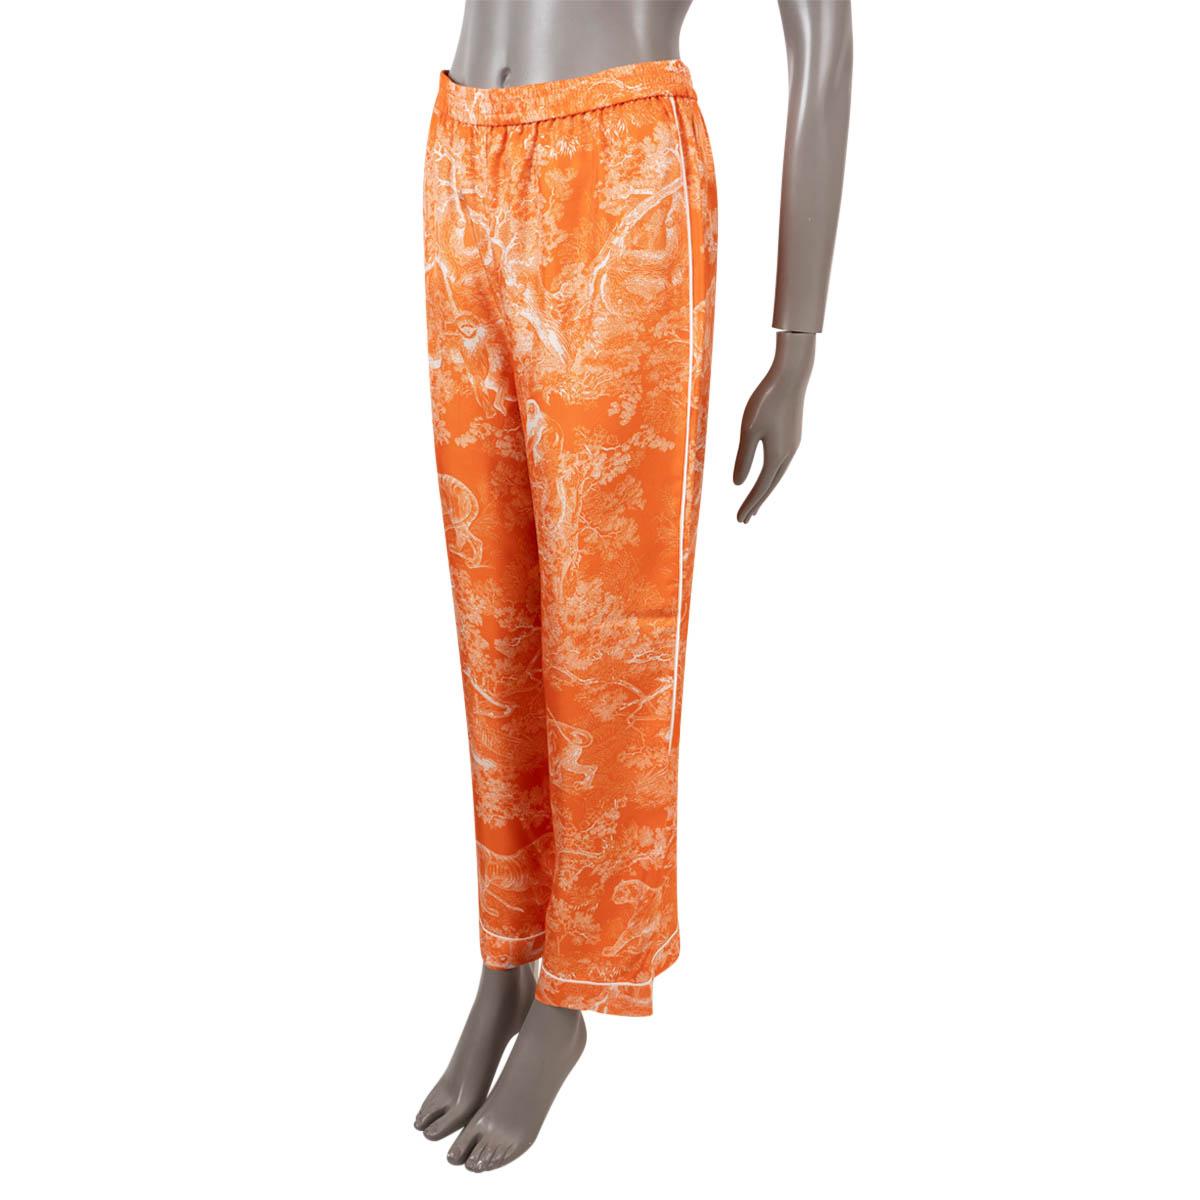 100% authentic Christian Dior pajama pants in fluorescent orange Toile de Jouy Reverse silk twill (100%). Features contrasting white piping, wide legs and elastic waist. Has been worn and is in excellent condition.

Complete the look with matching